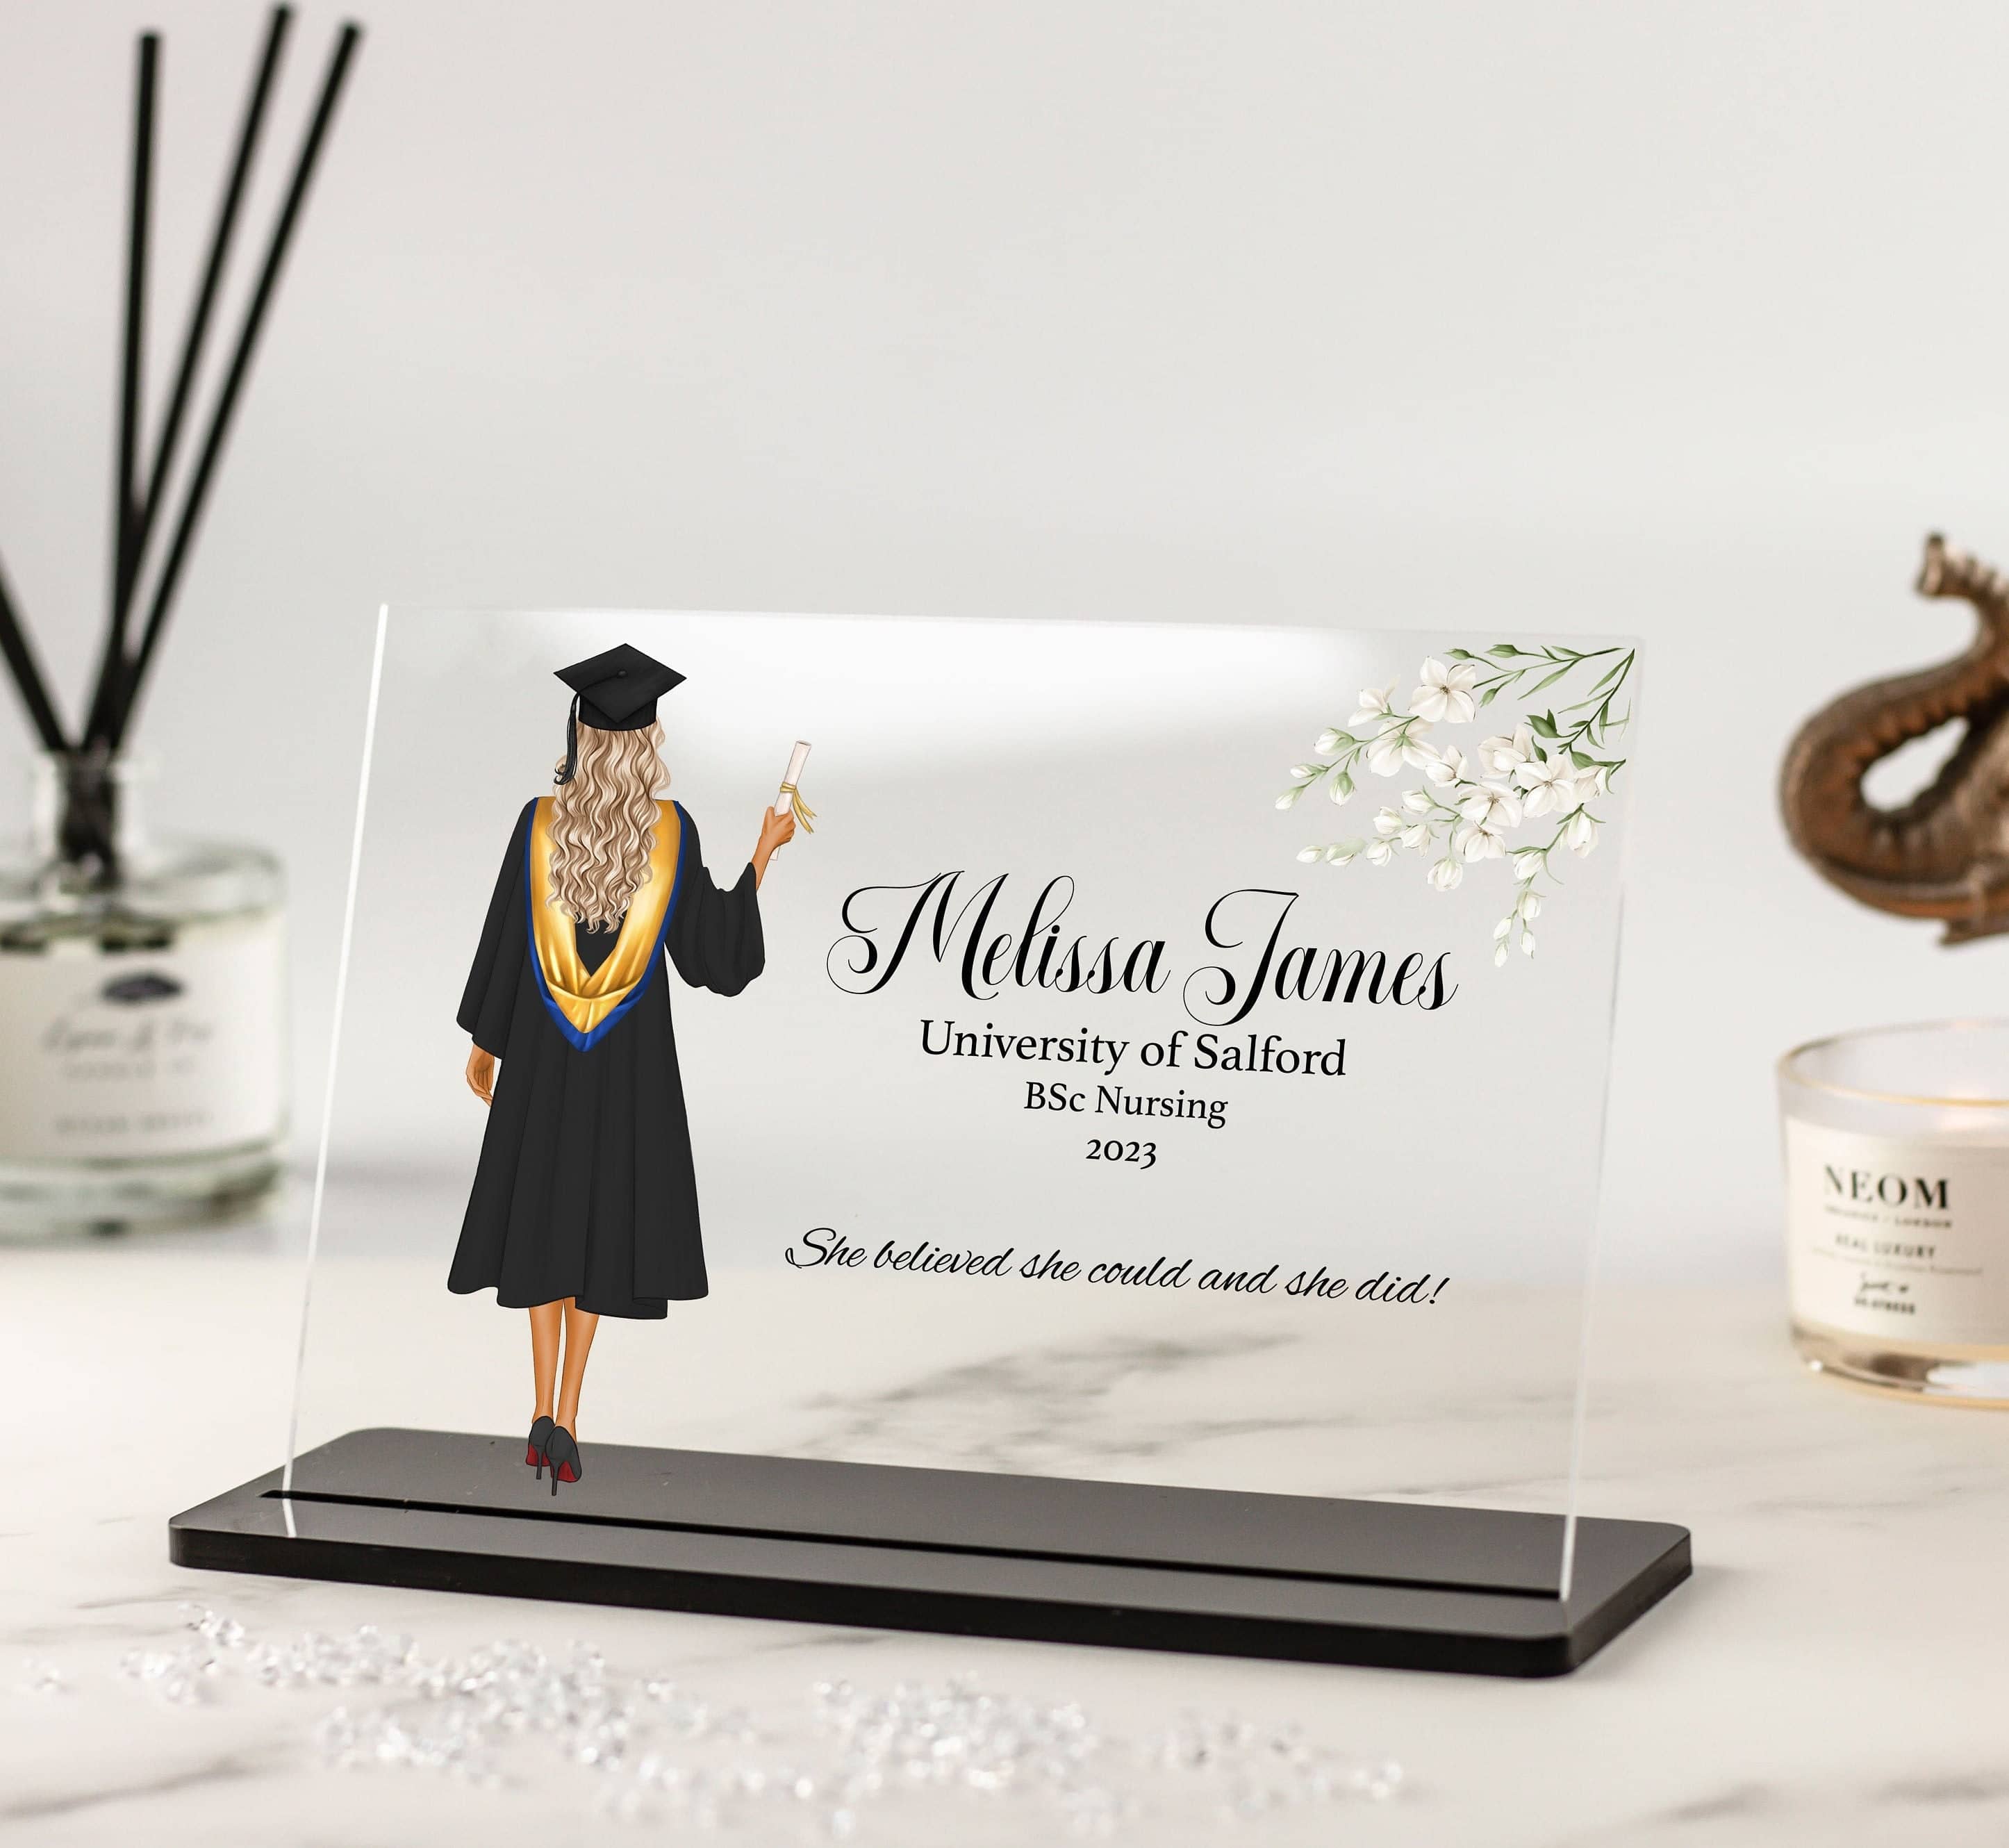 Graduation Gifts For Her, Graduation Plaque, Masters Degree, Law School, PHD, Nurse Graduation Decorations 2023 Gift For Friend, Daughter